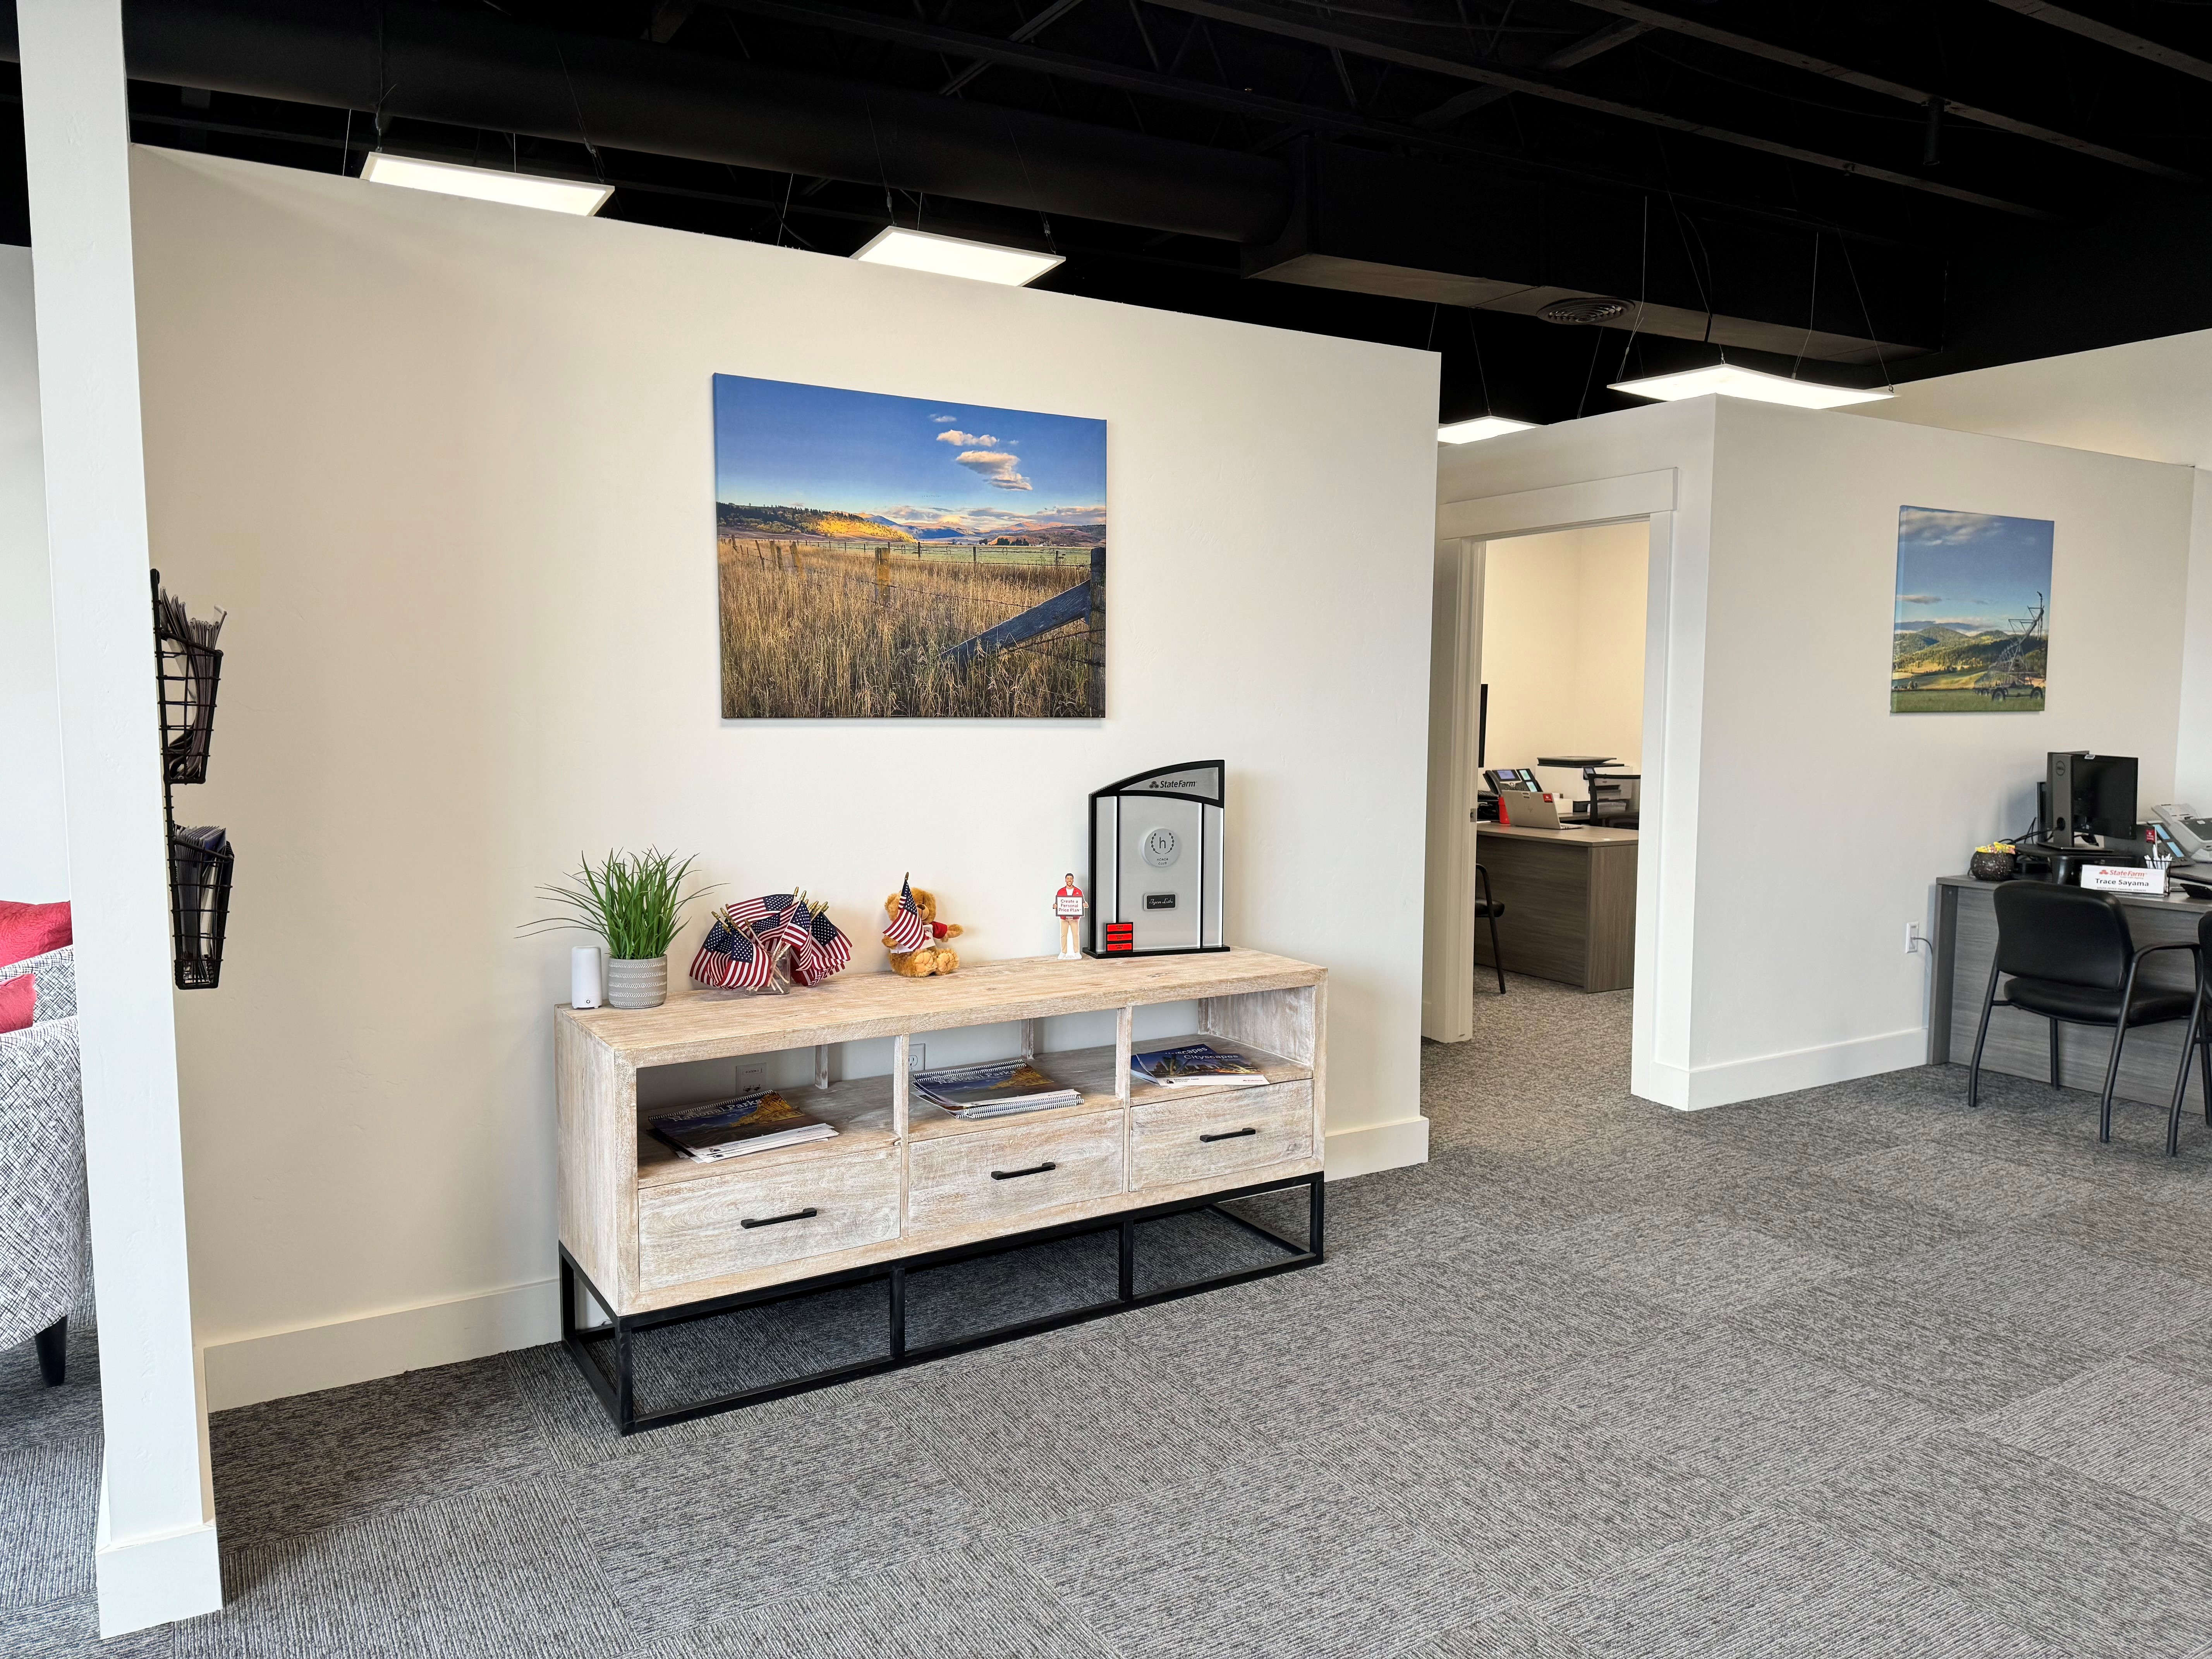 Step inside the Tyson Luthi State Farm Agency and let us take care of your insurance needs!